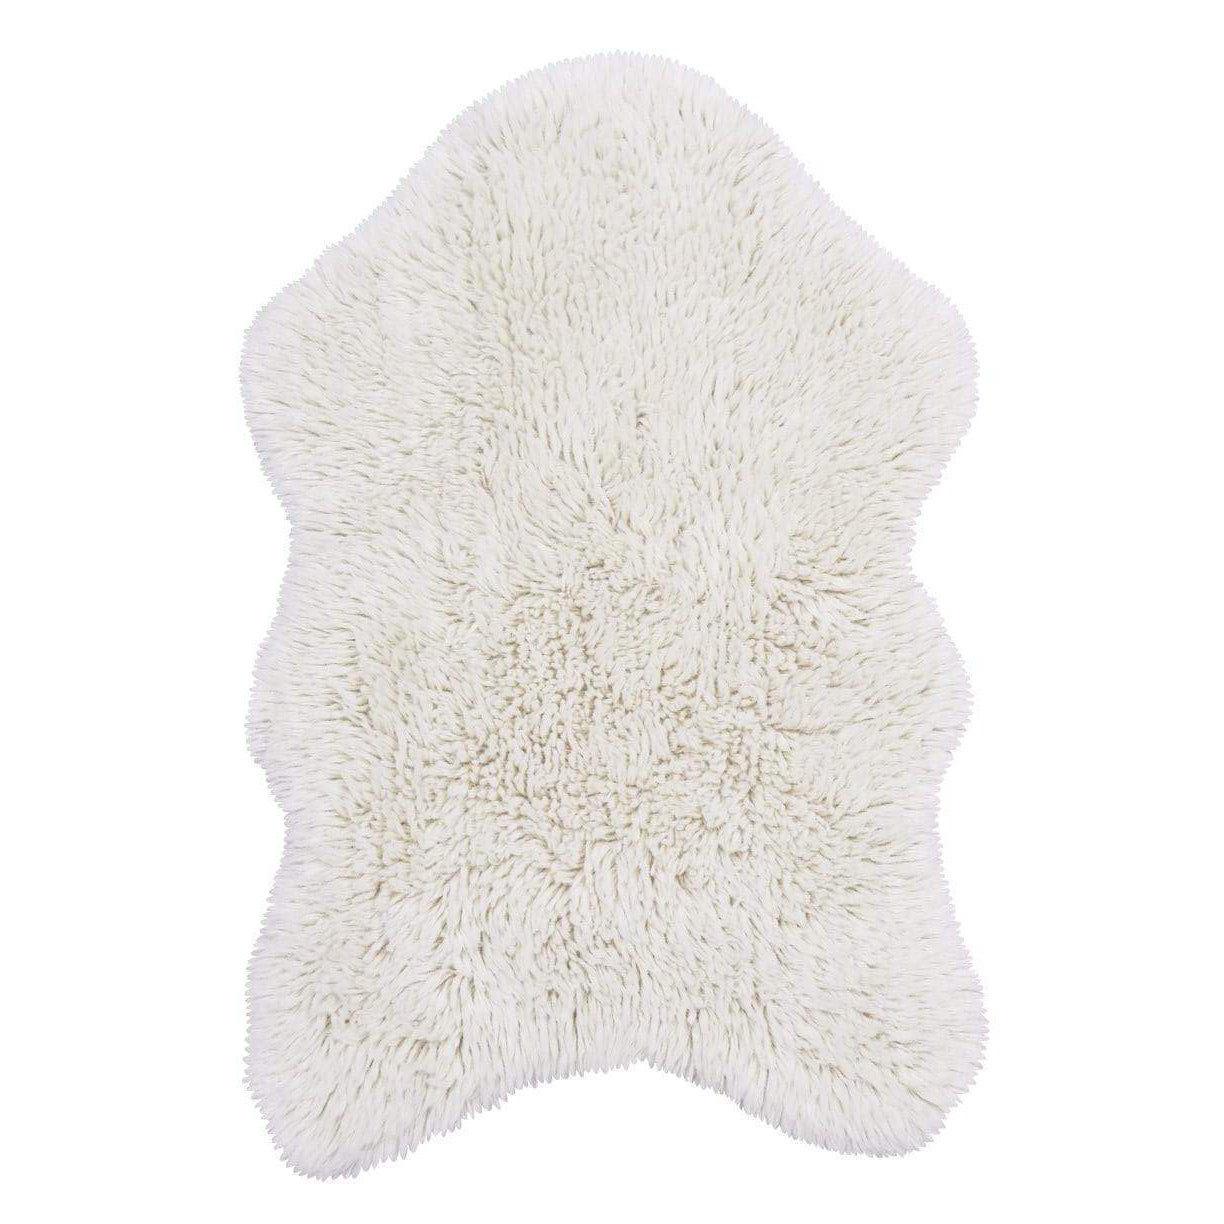 Lorena Canals Woolly White Woolable Area Rug